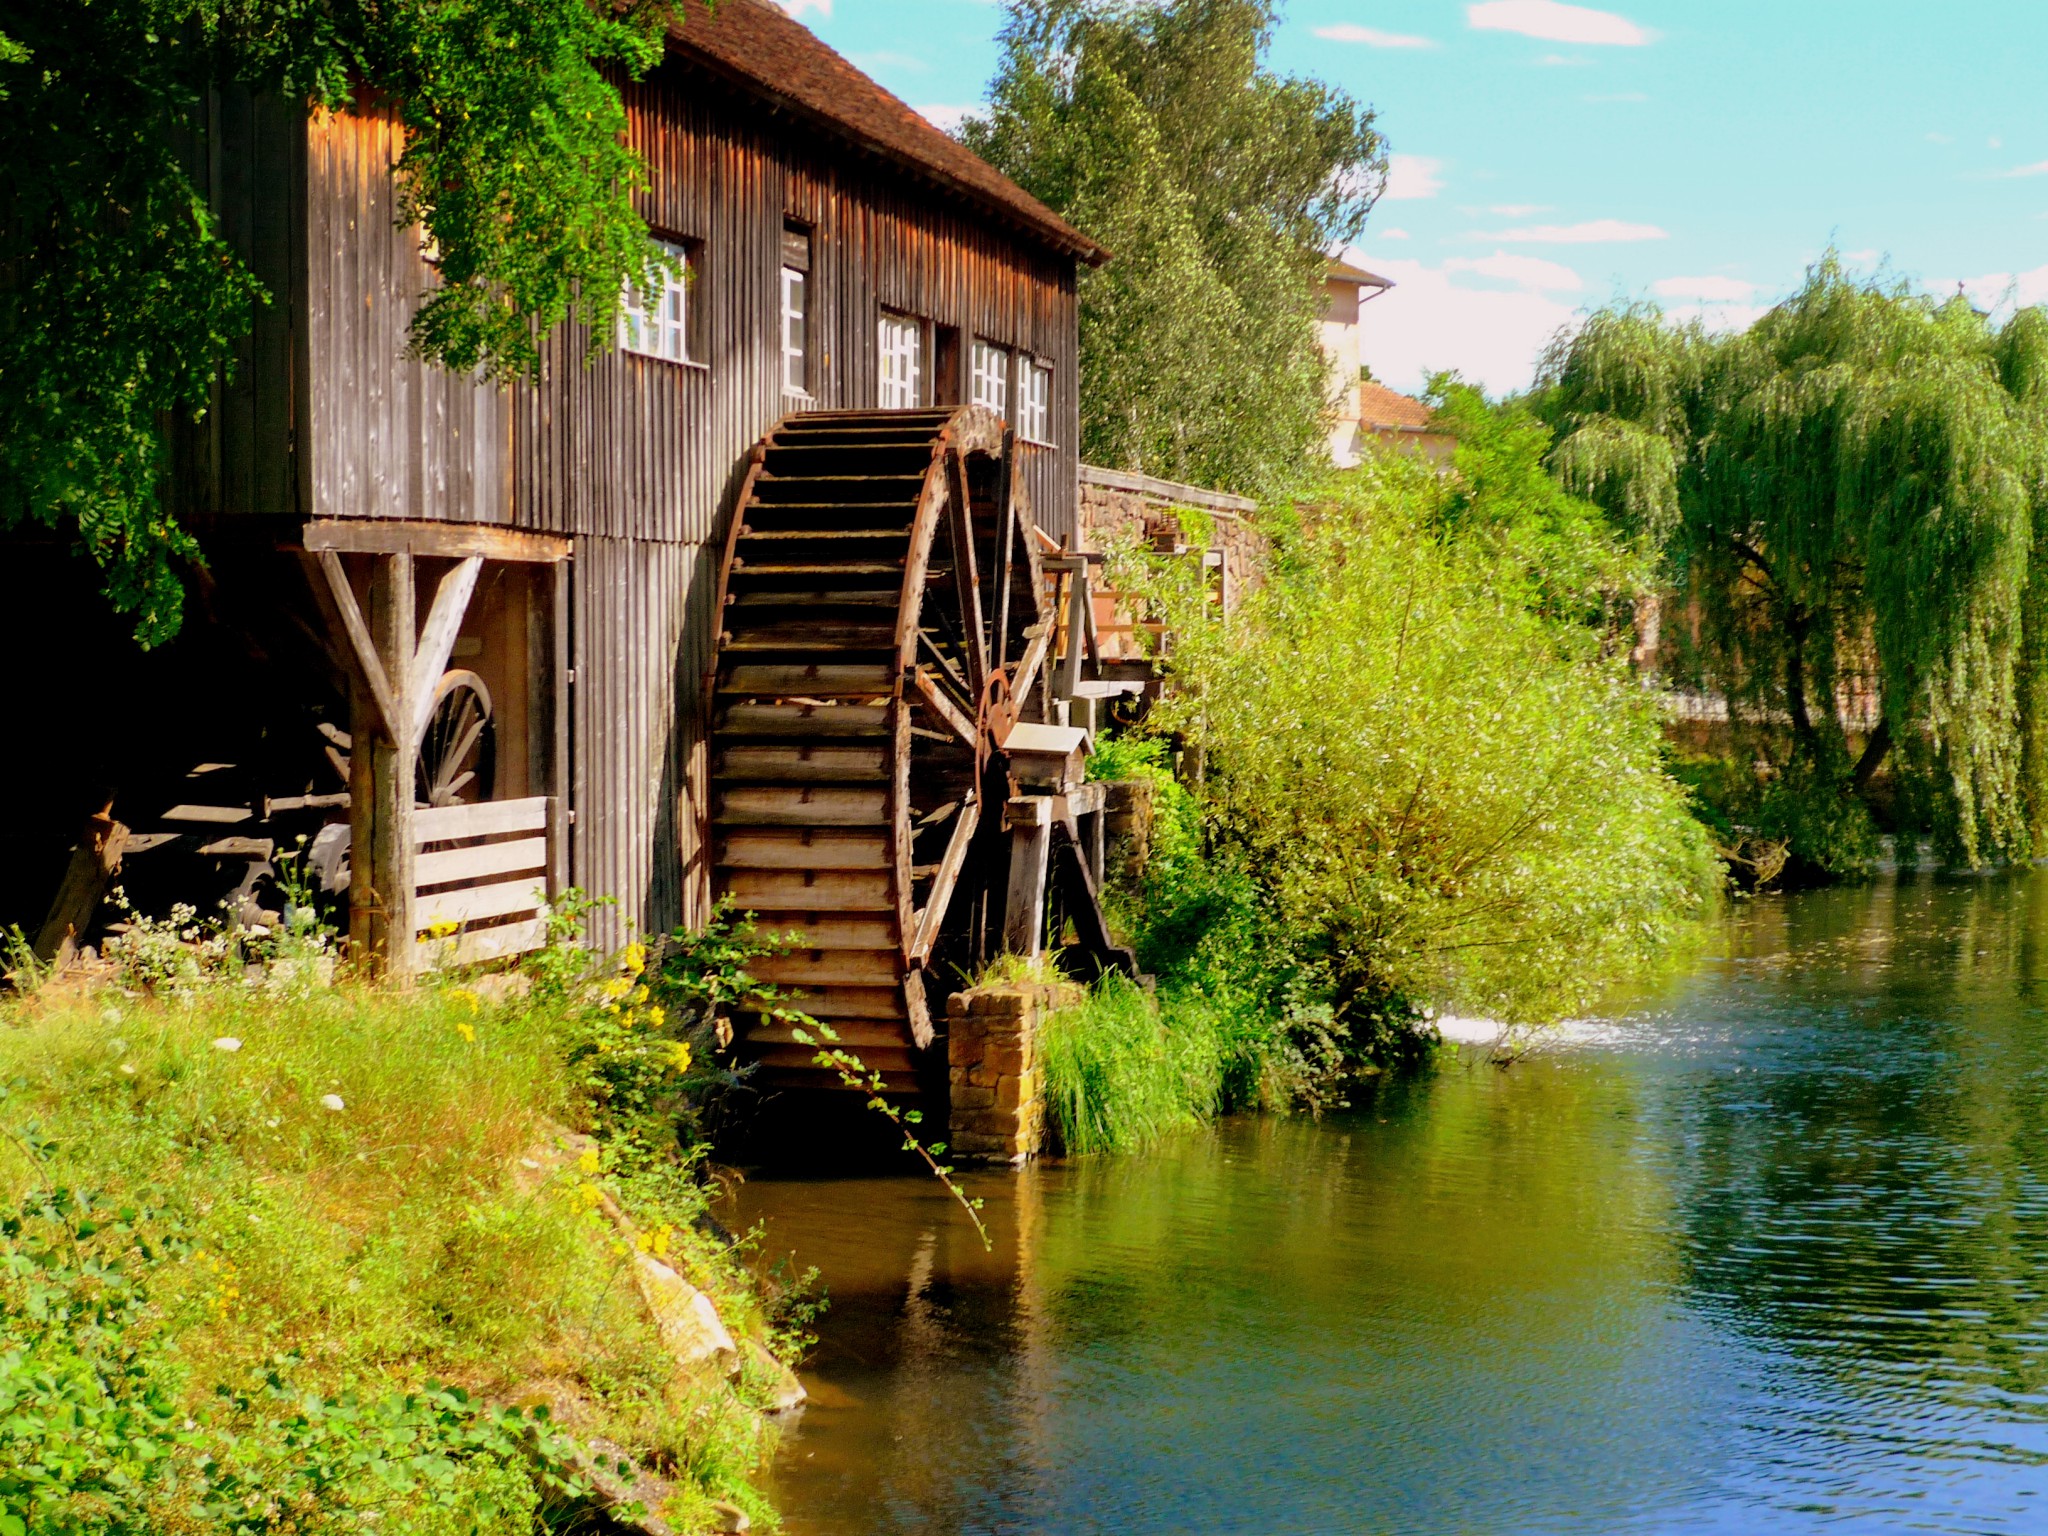 Watermill at the Ecomusée d'Alsace © French Moments